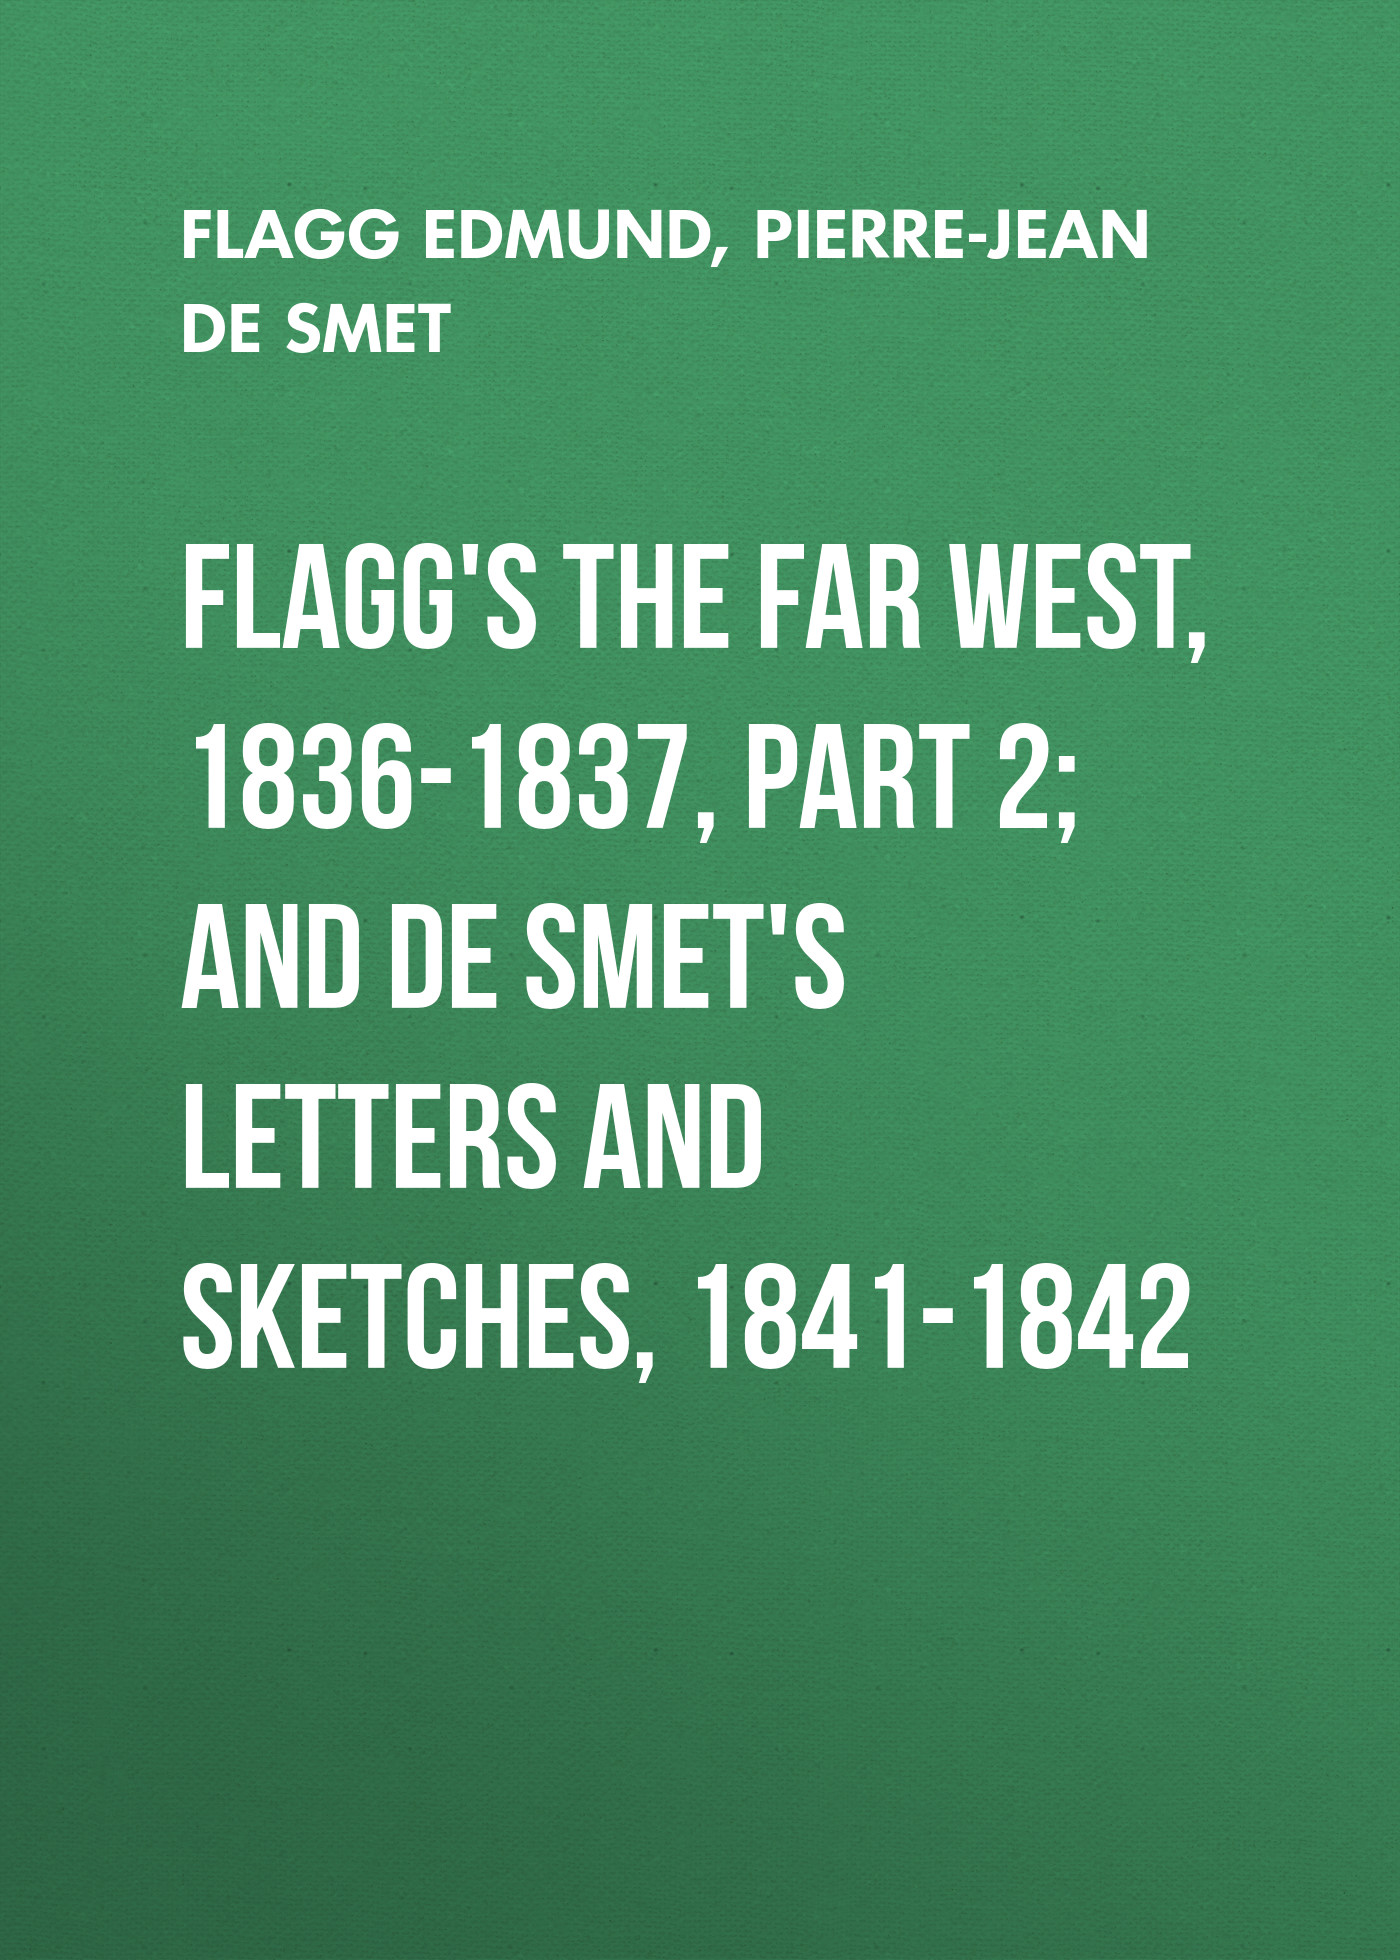 Flagg Edmund Flagg's The Far West, 1836-1837, part 2; and De Smet's Letters and Sketches, 1841-1842